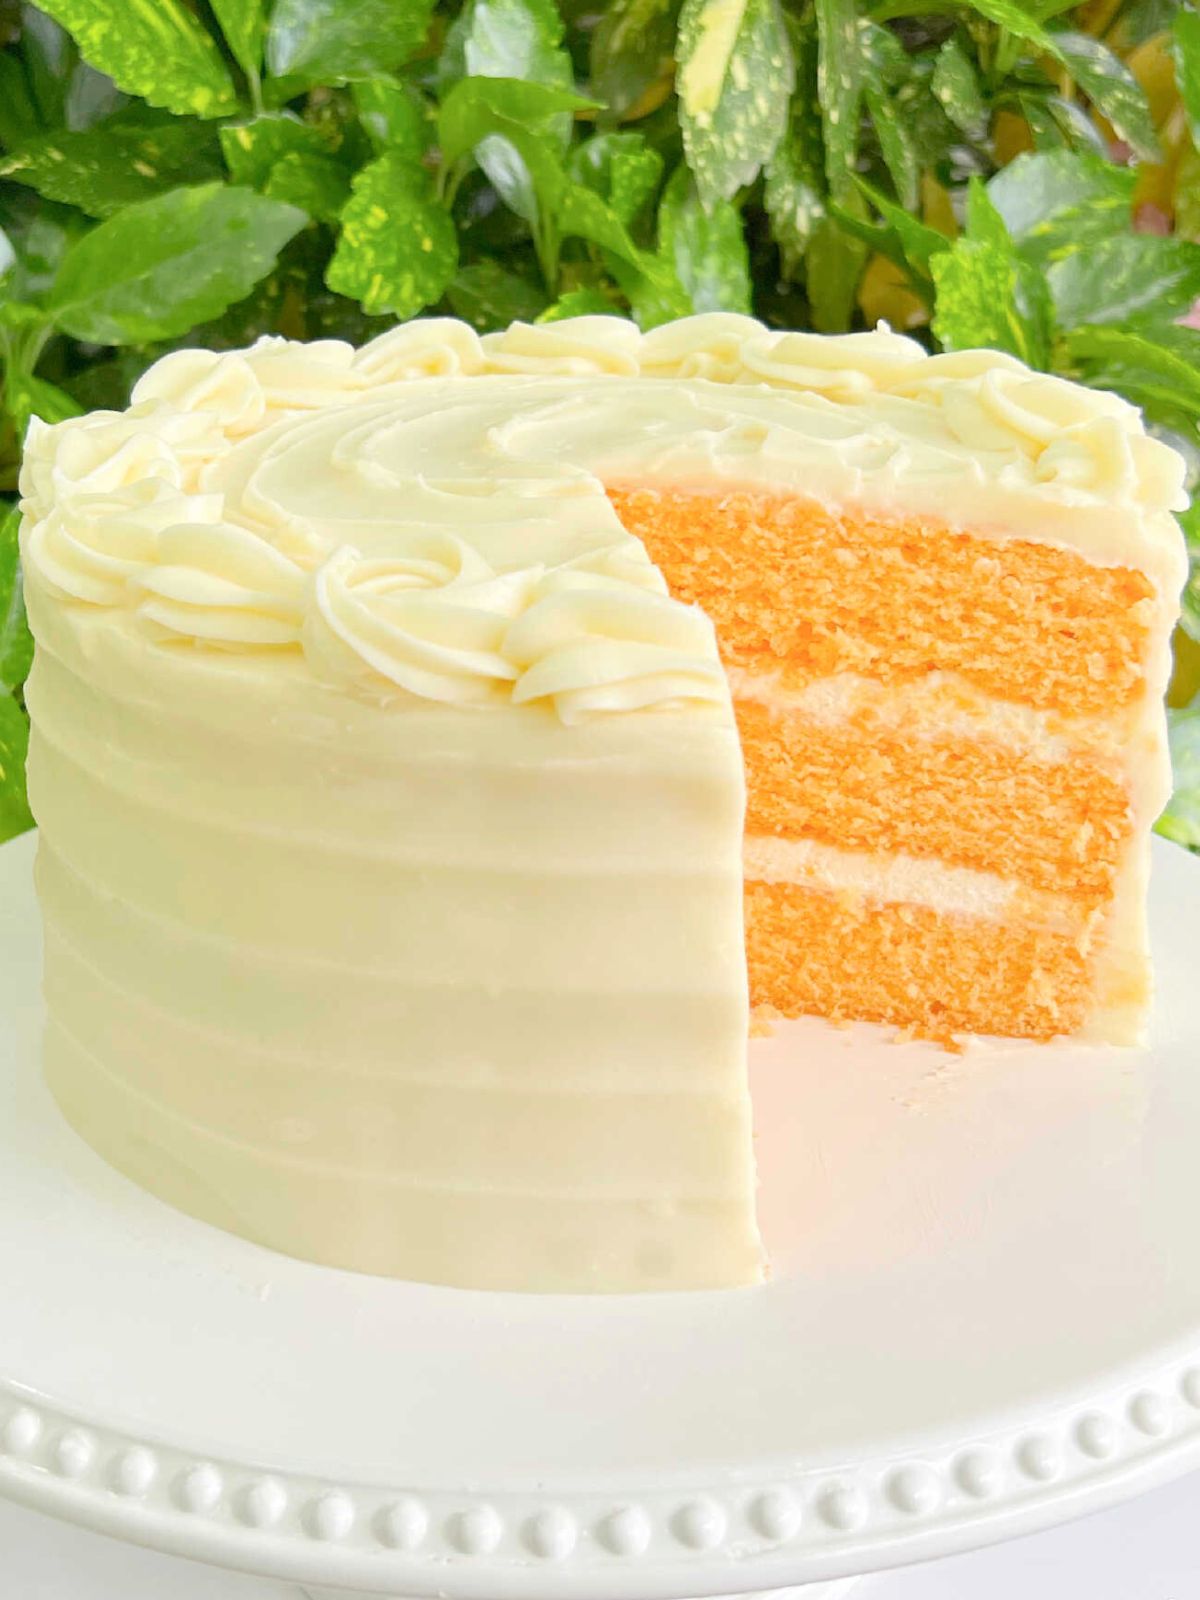 Sliced orange cake, filled and frosted with cream cheese frosting, on a white pedestal.